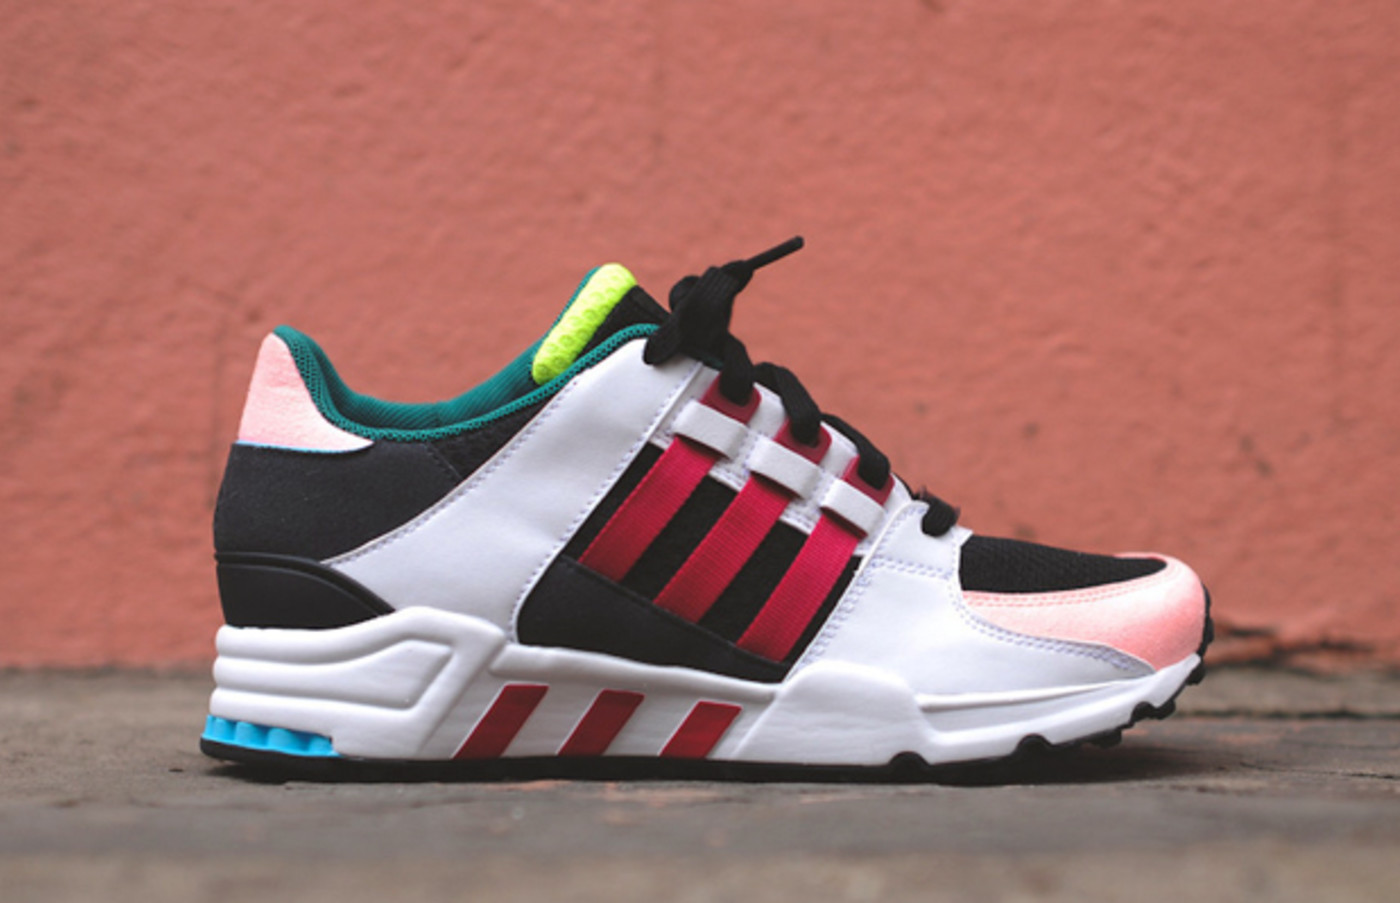 adidas eqt support 93 oddity pack 